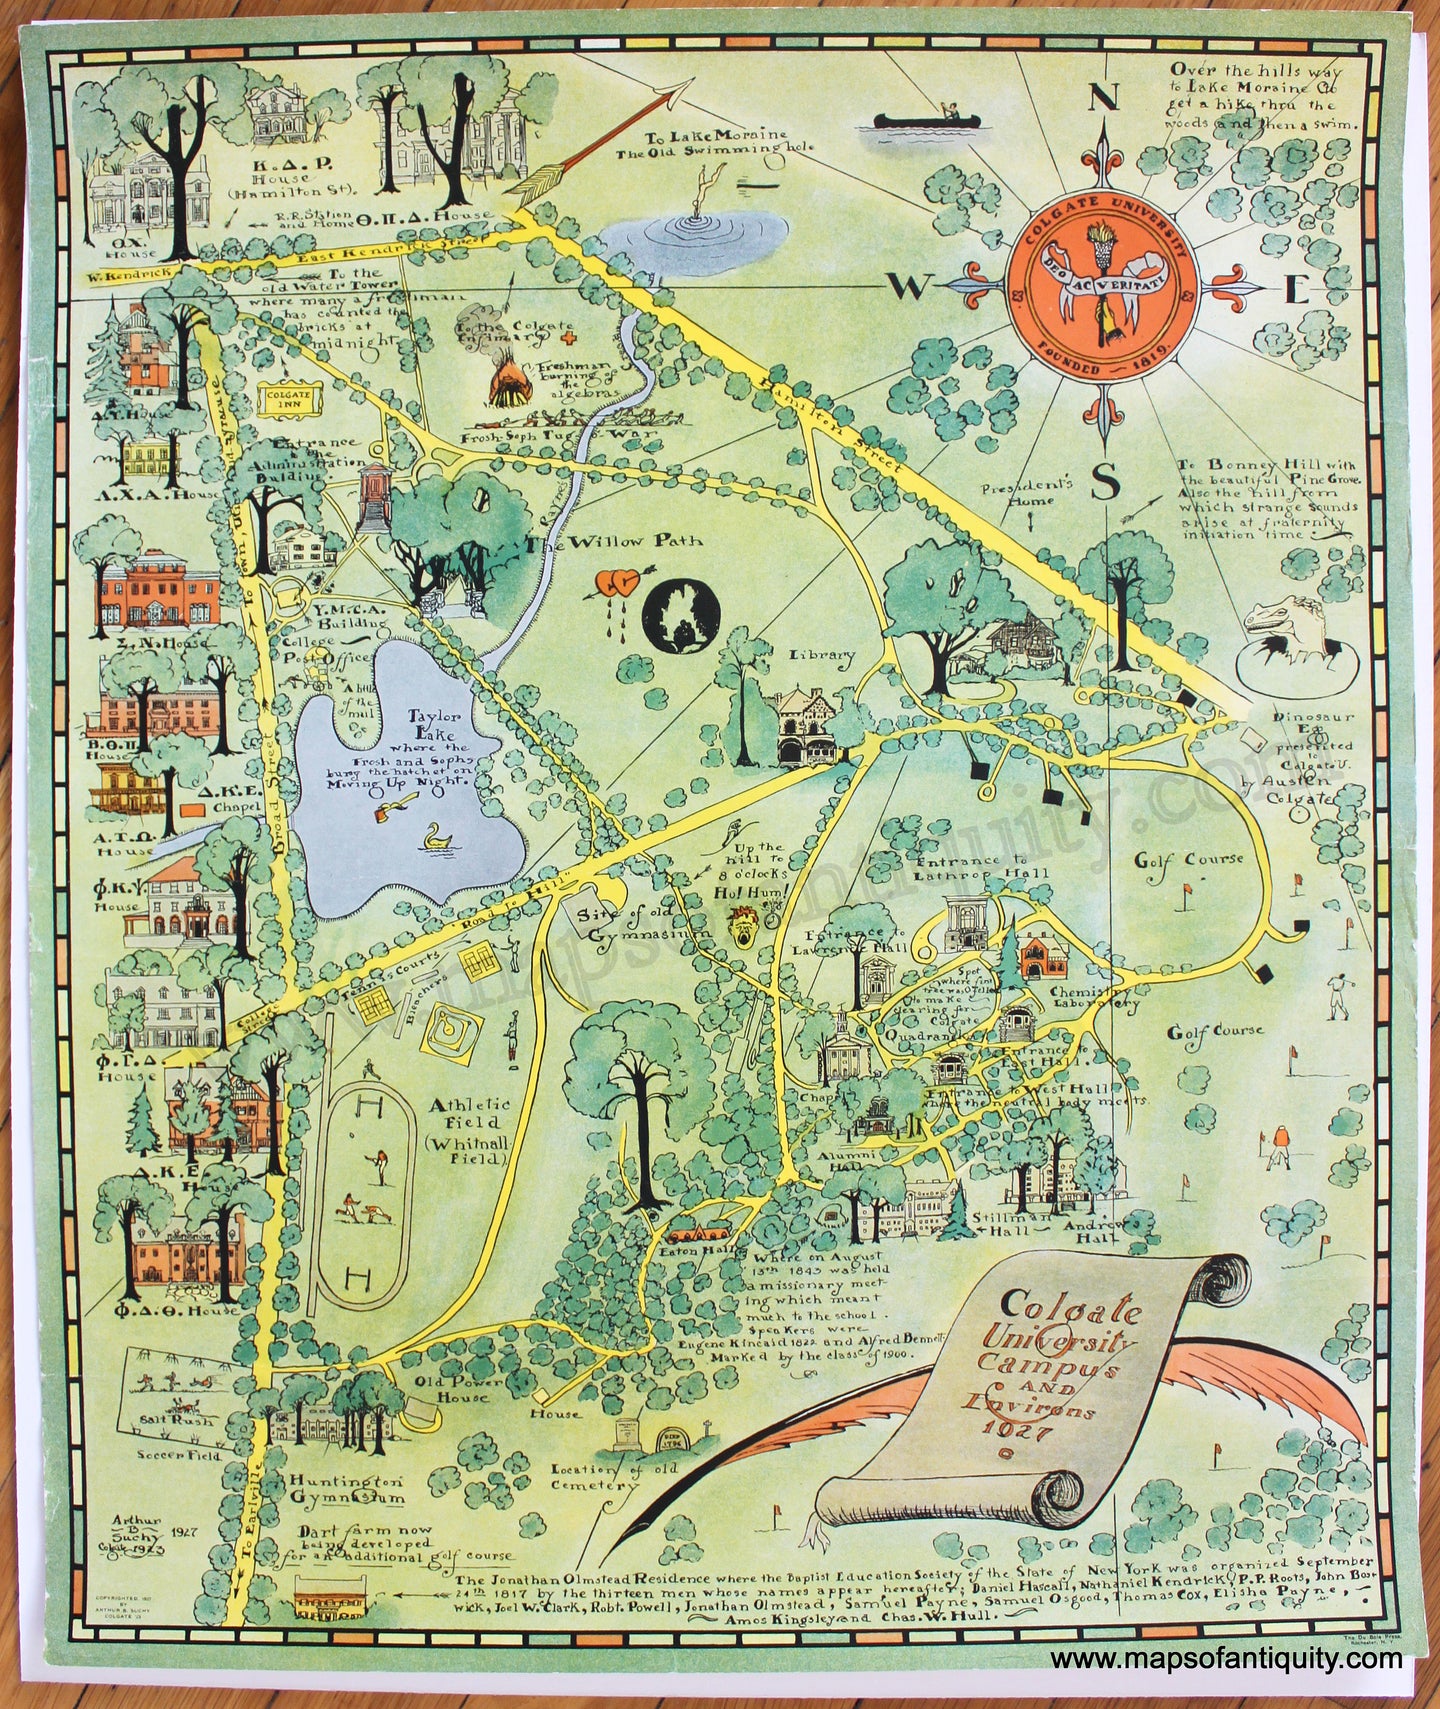 Antique-Printed-Color-Pictorial-Map-Colleges-Colgate-University-Campus-and-Environs-1927-1927-Arthur-Suchy--1900s-20th-century-Maps-of-Antiquity